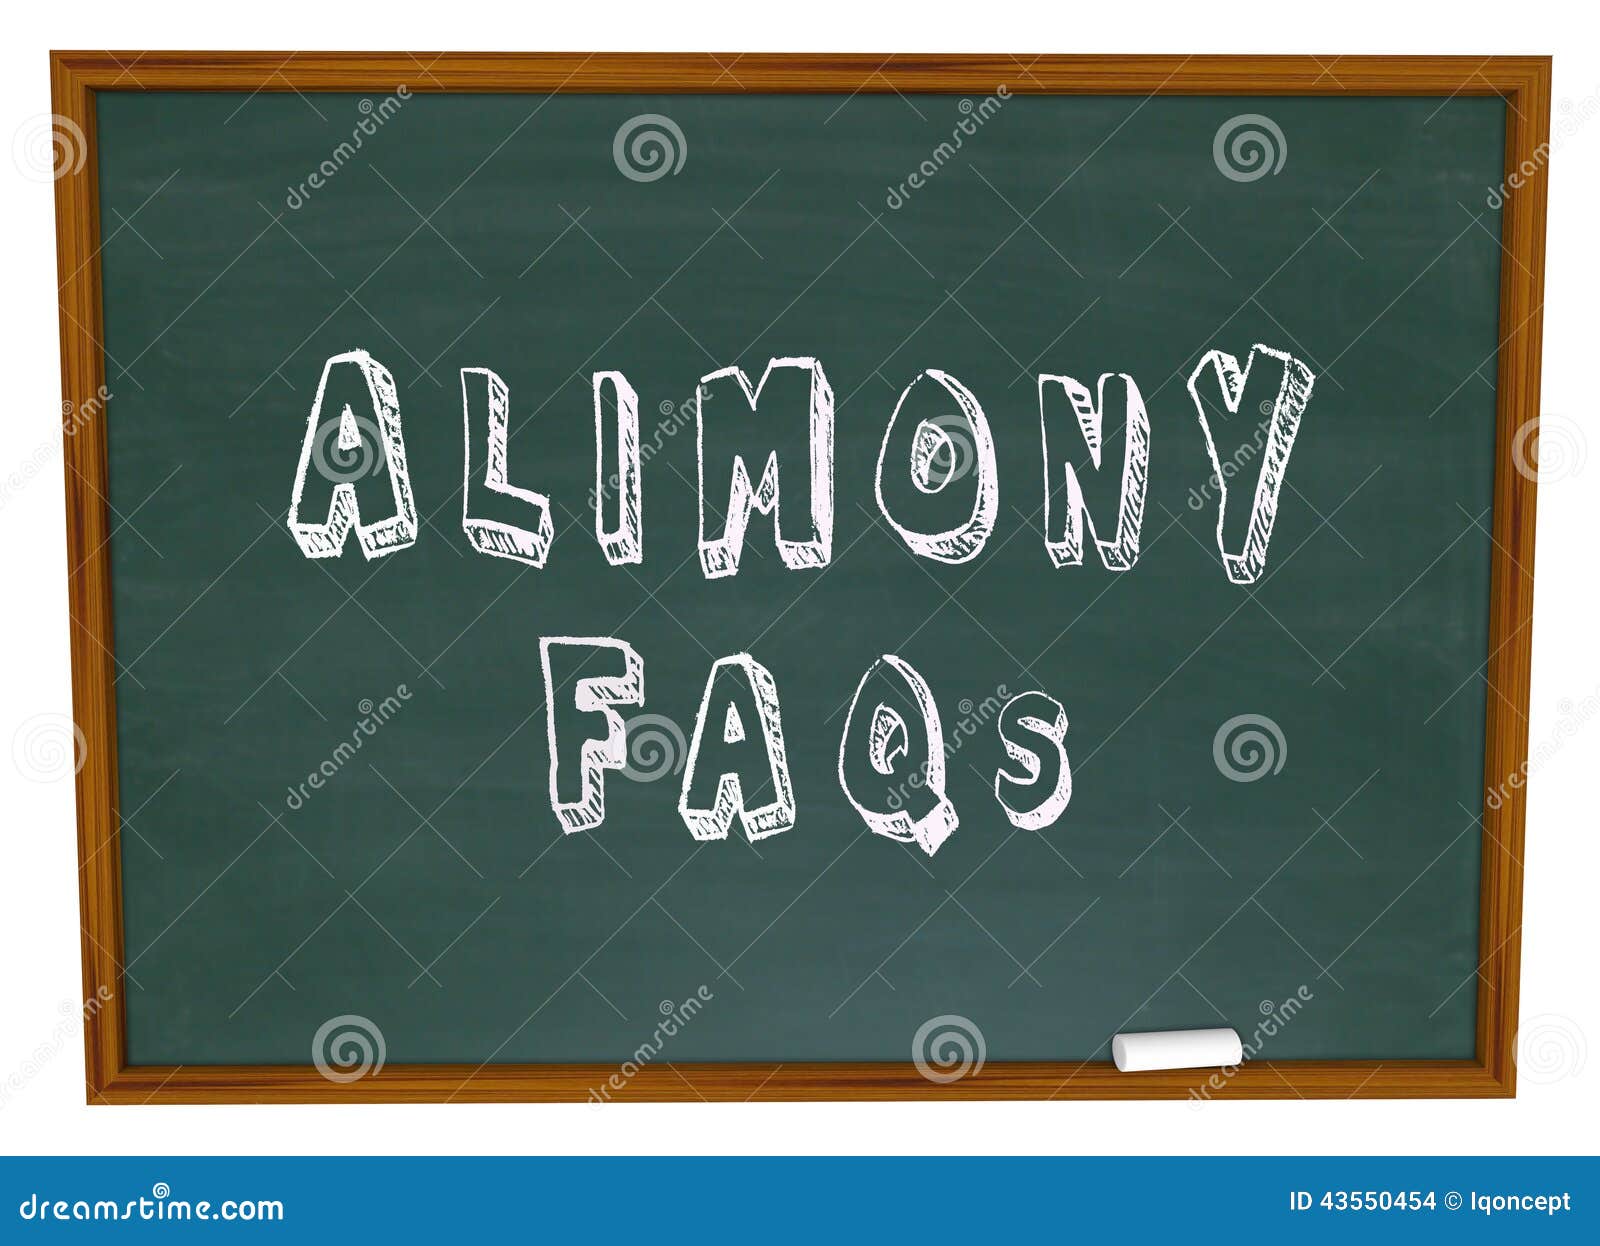 alimony faqs frequently asked legal questions chalkboard